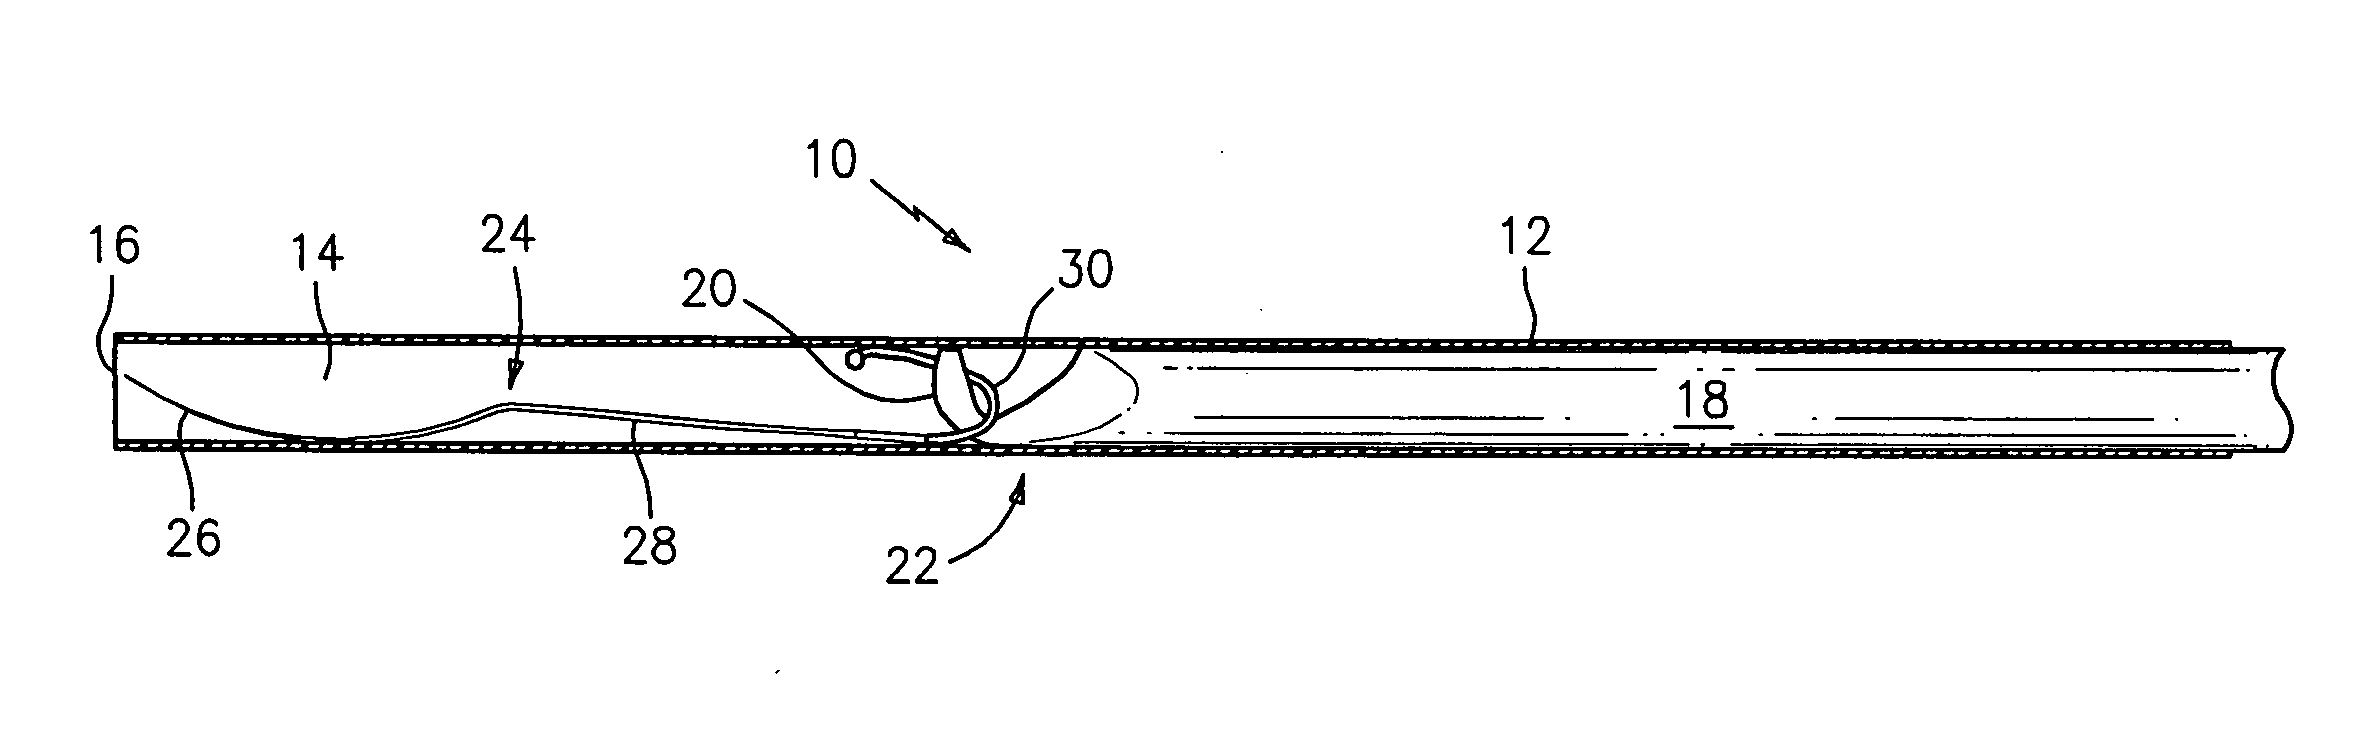 Hooked rod delivery system for use in minimally invasive surgery